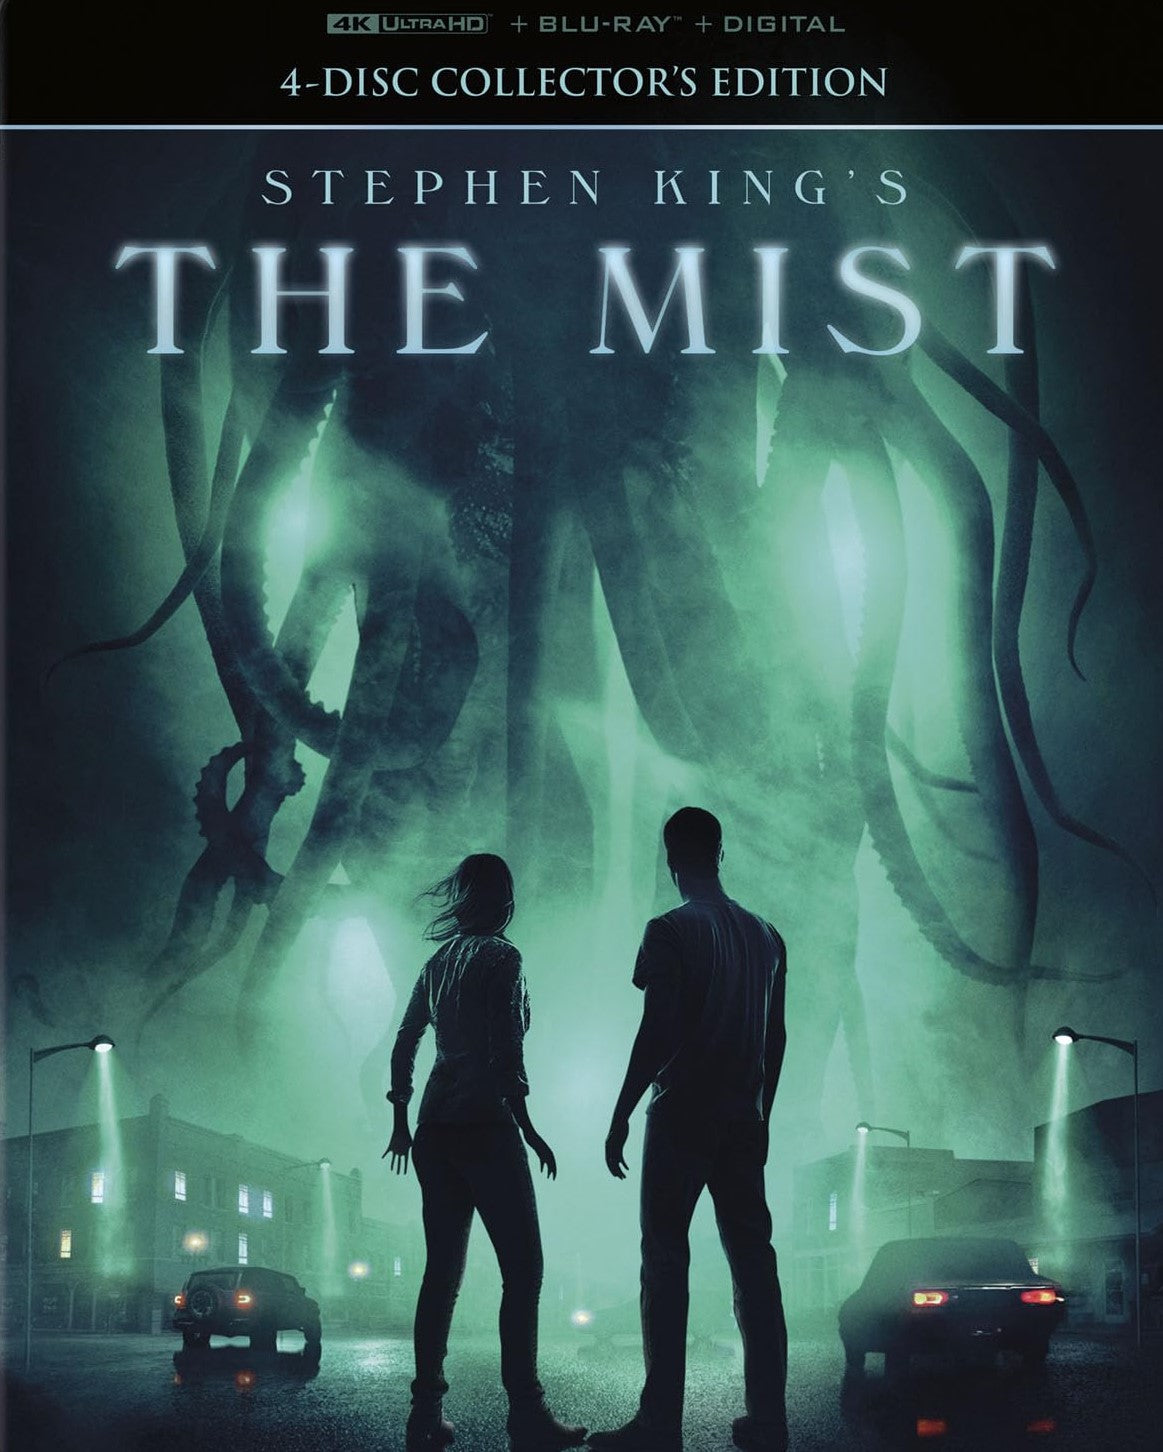 The Mist Collector's Edition Lionsgate 4K UHD/Blu-Ray [NEW] [SLIPCOVER]